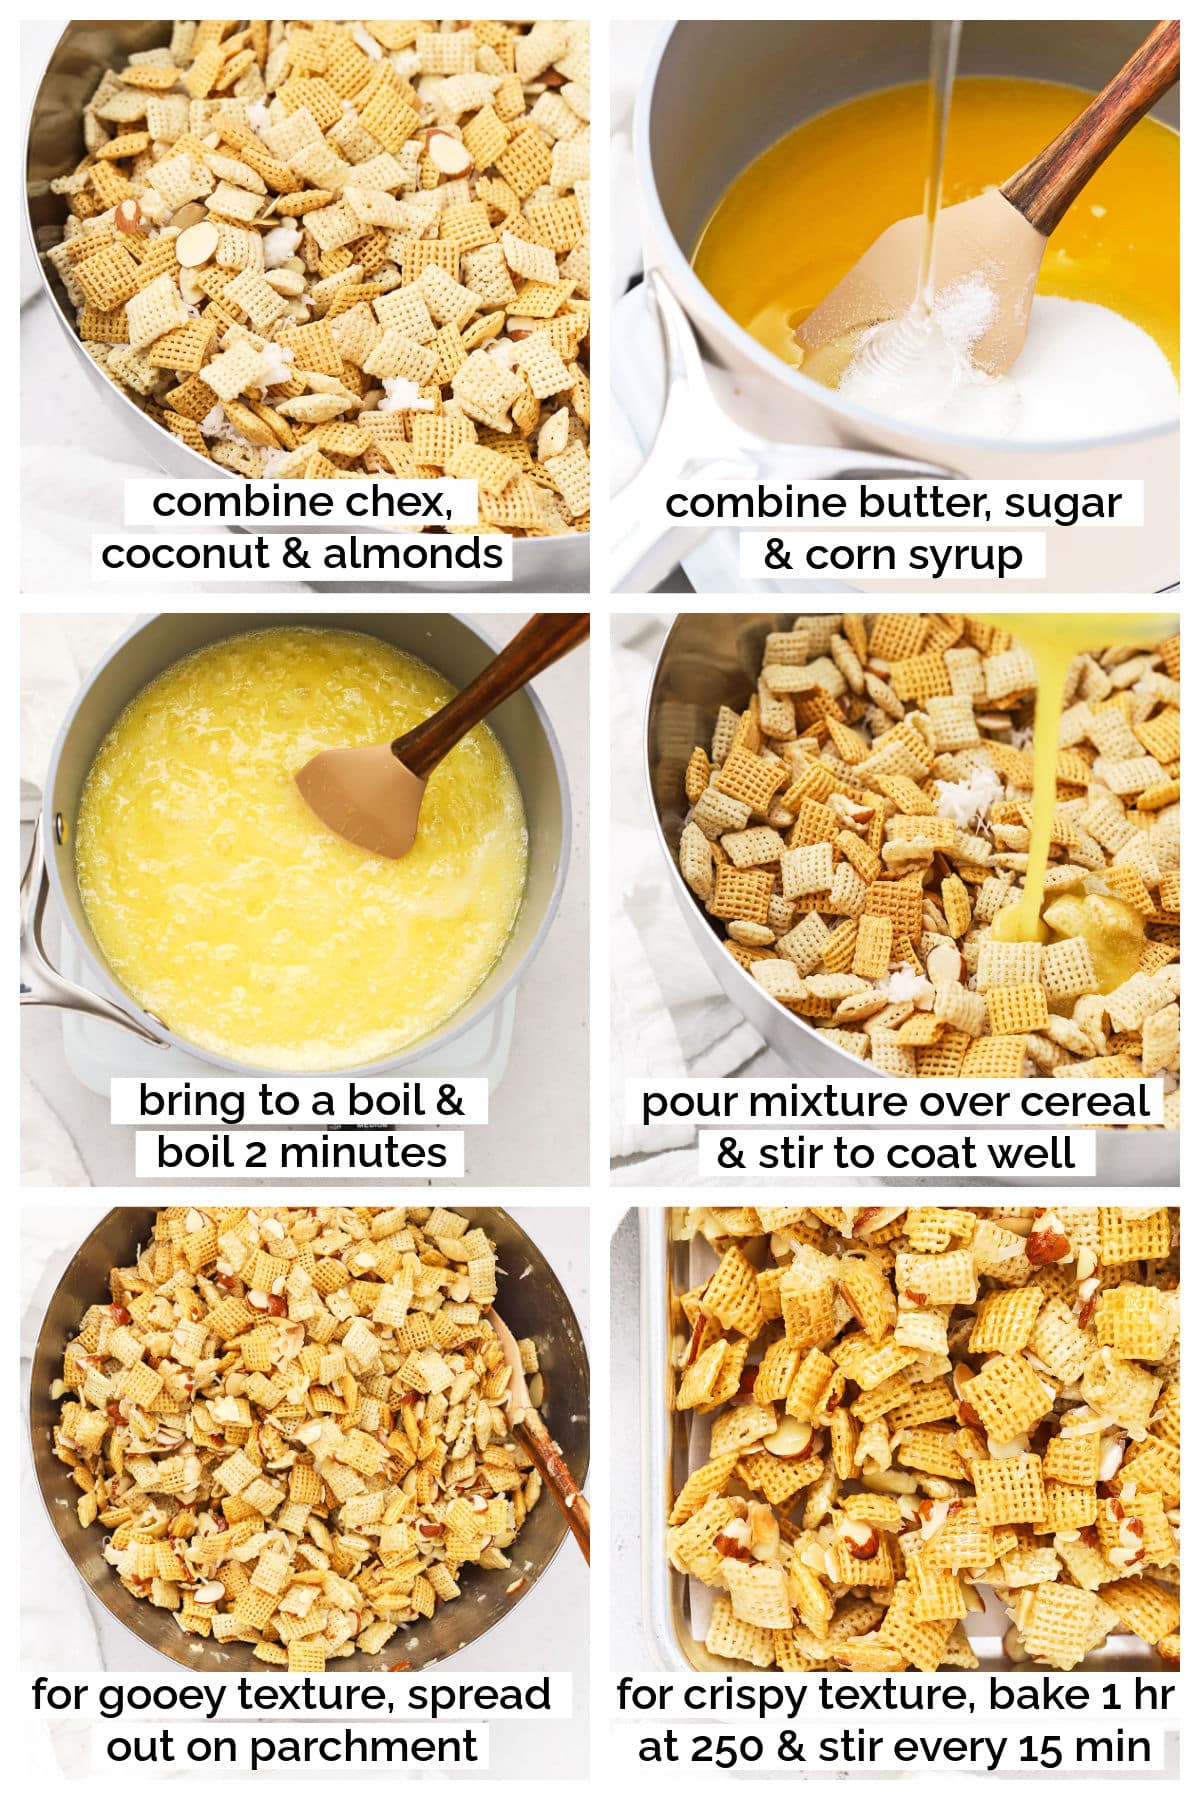 making gluten-free sweet chex mix step by step